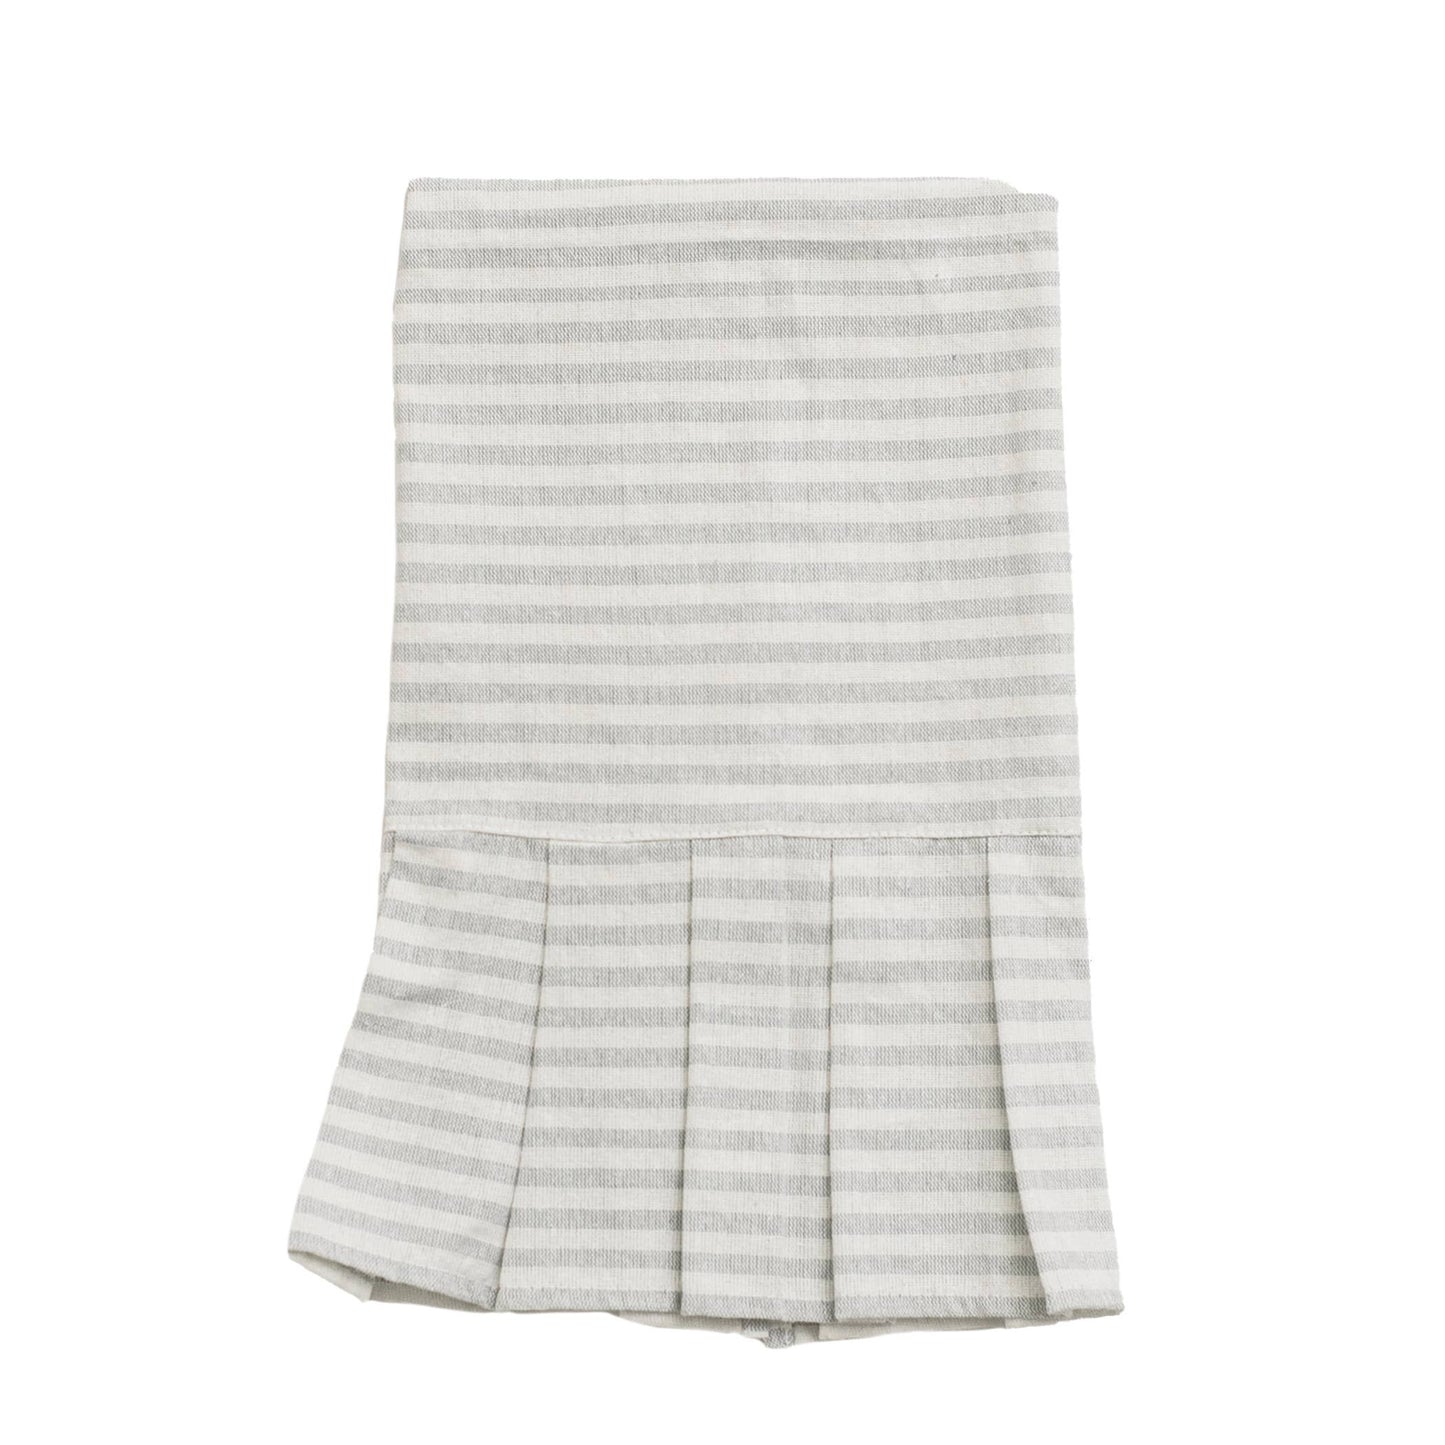 Striped Tea Towel with Ruffle - Cream with Grey Stripes